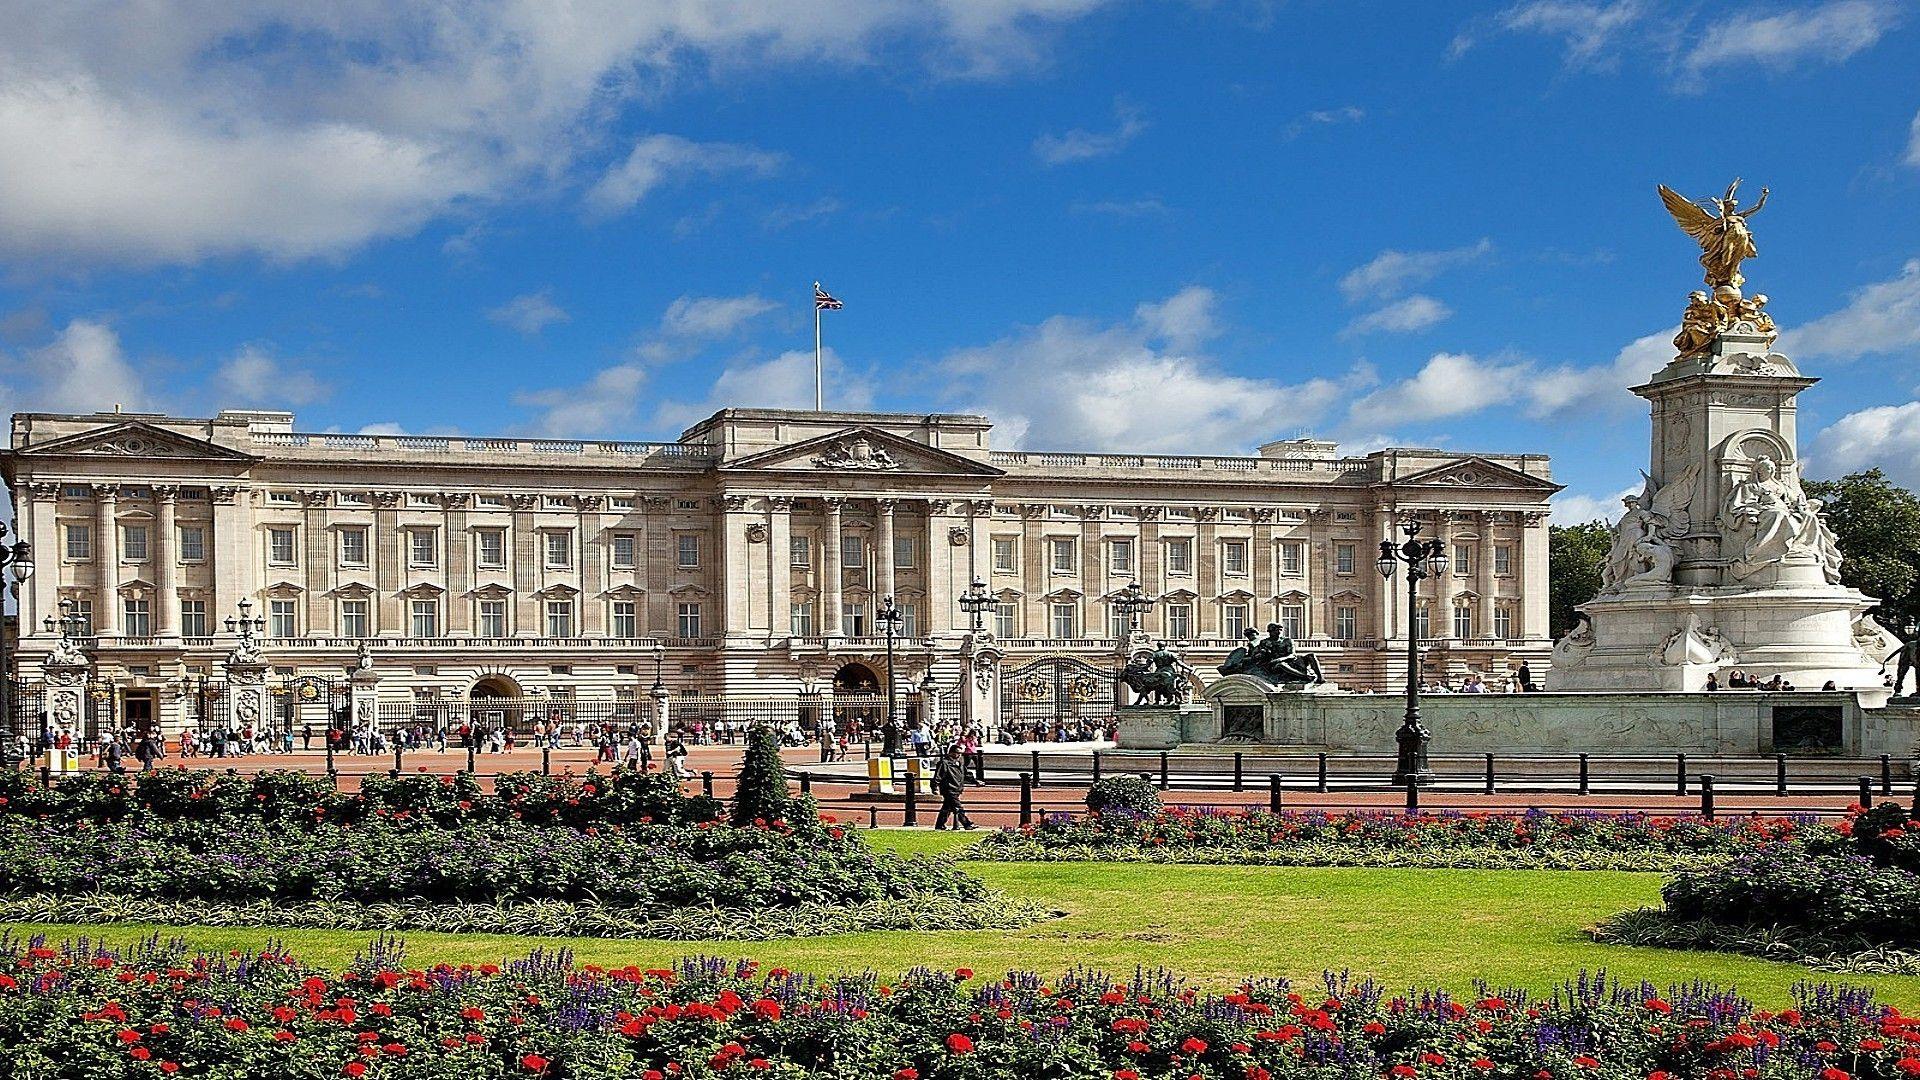 London, Buckingham Palace,. Android wallpaper for free